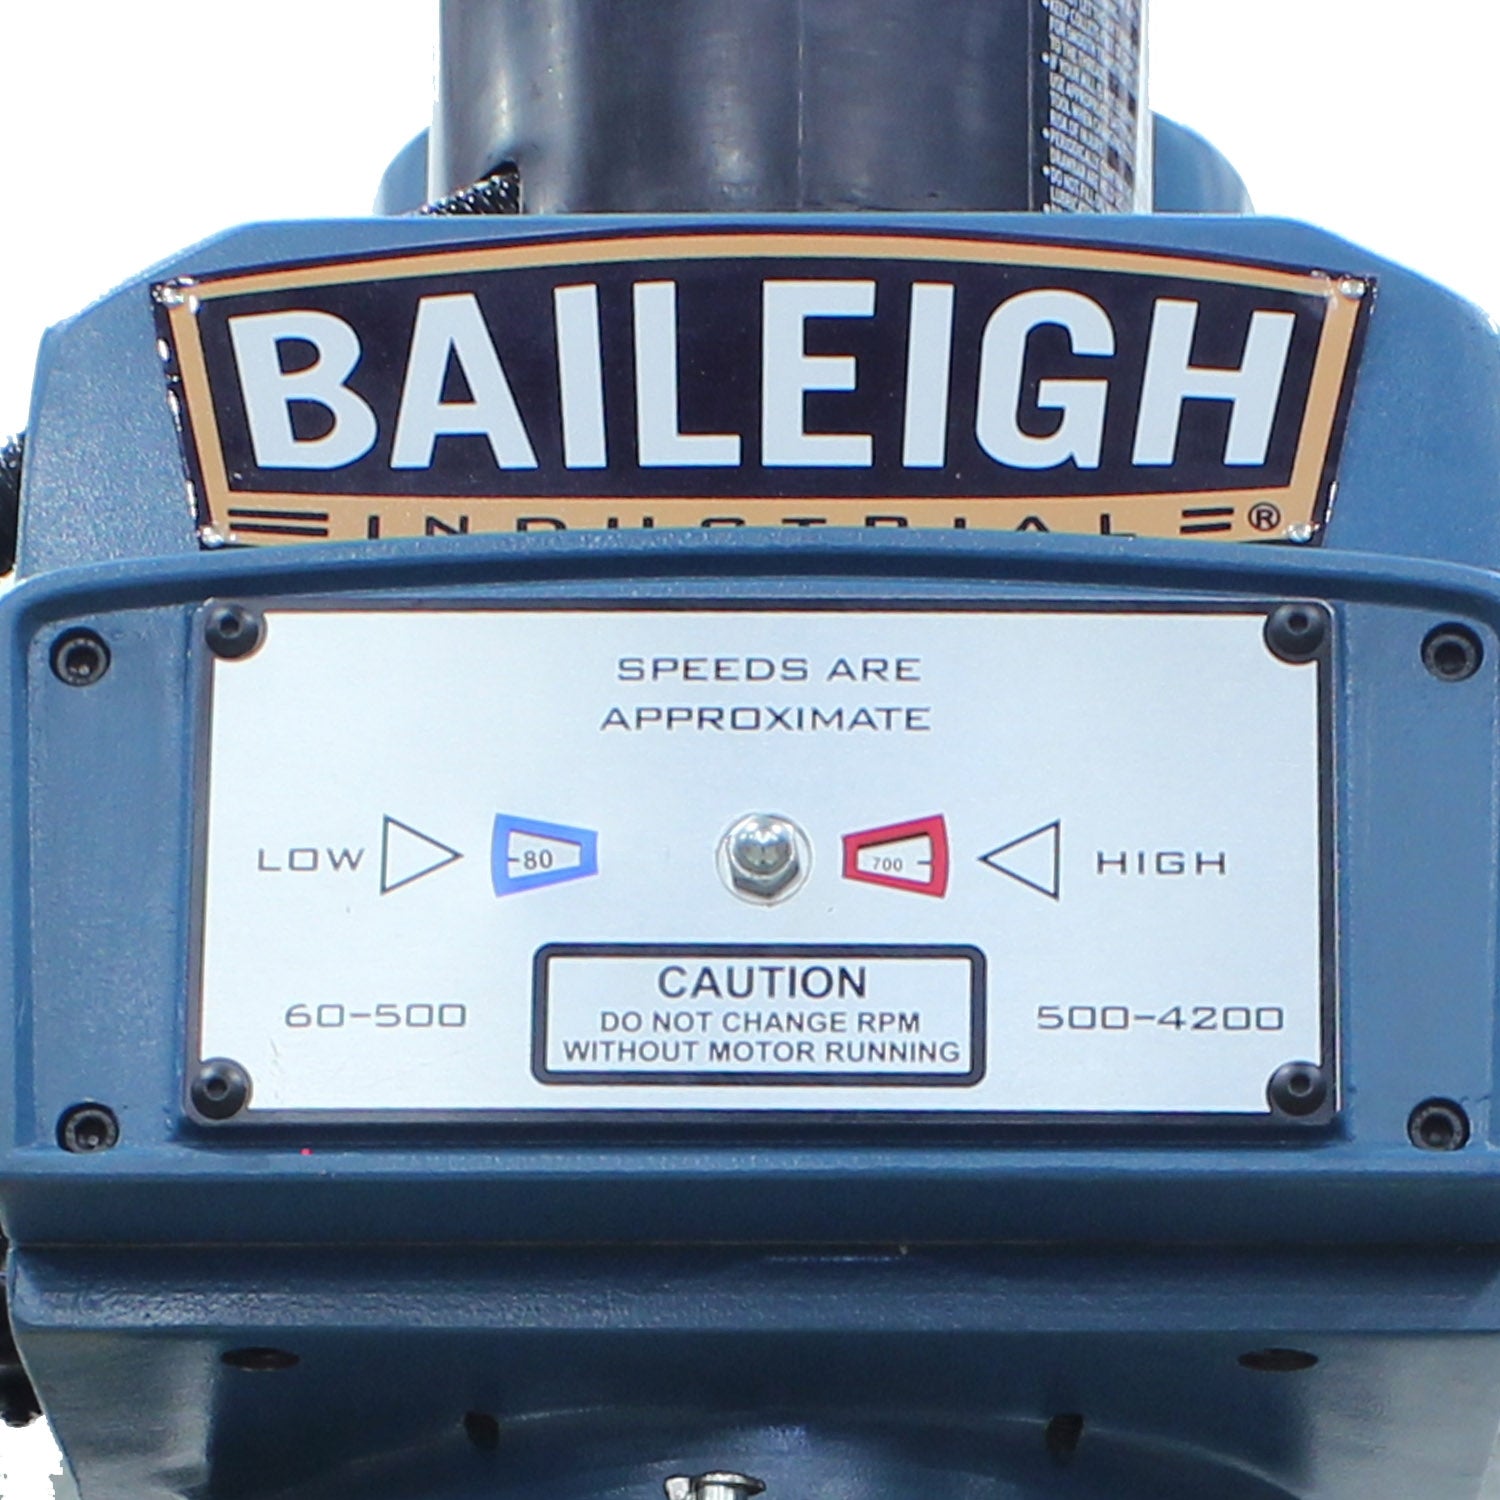 Baileigh VM-1054E-VS 220V 3 Phase Vertical Mill, 10" x 54" Table, Variable Speed, NT40 Spindle, Coolant, Power Feeds, DRO